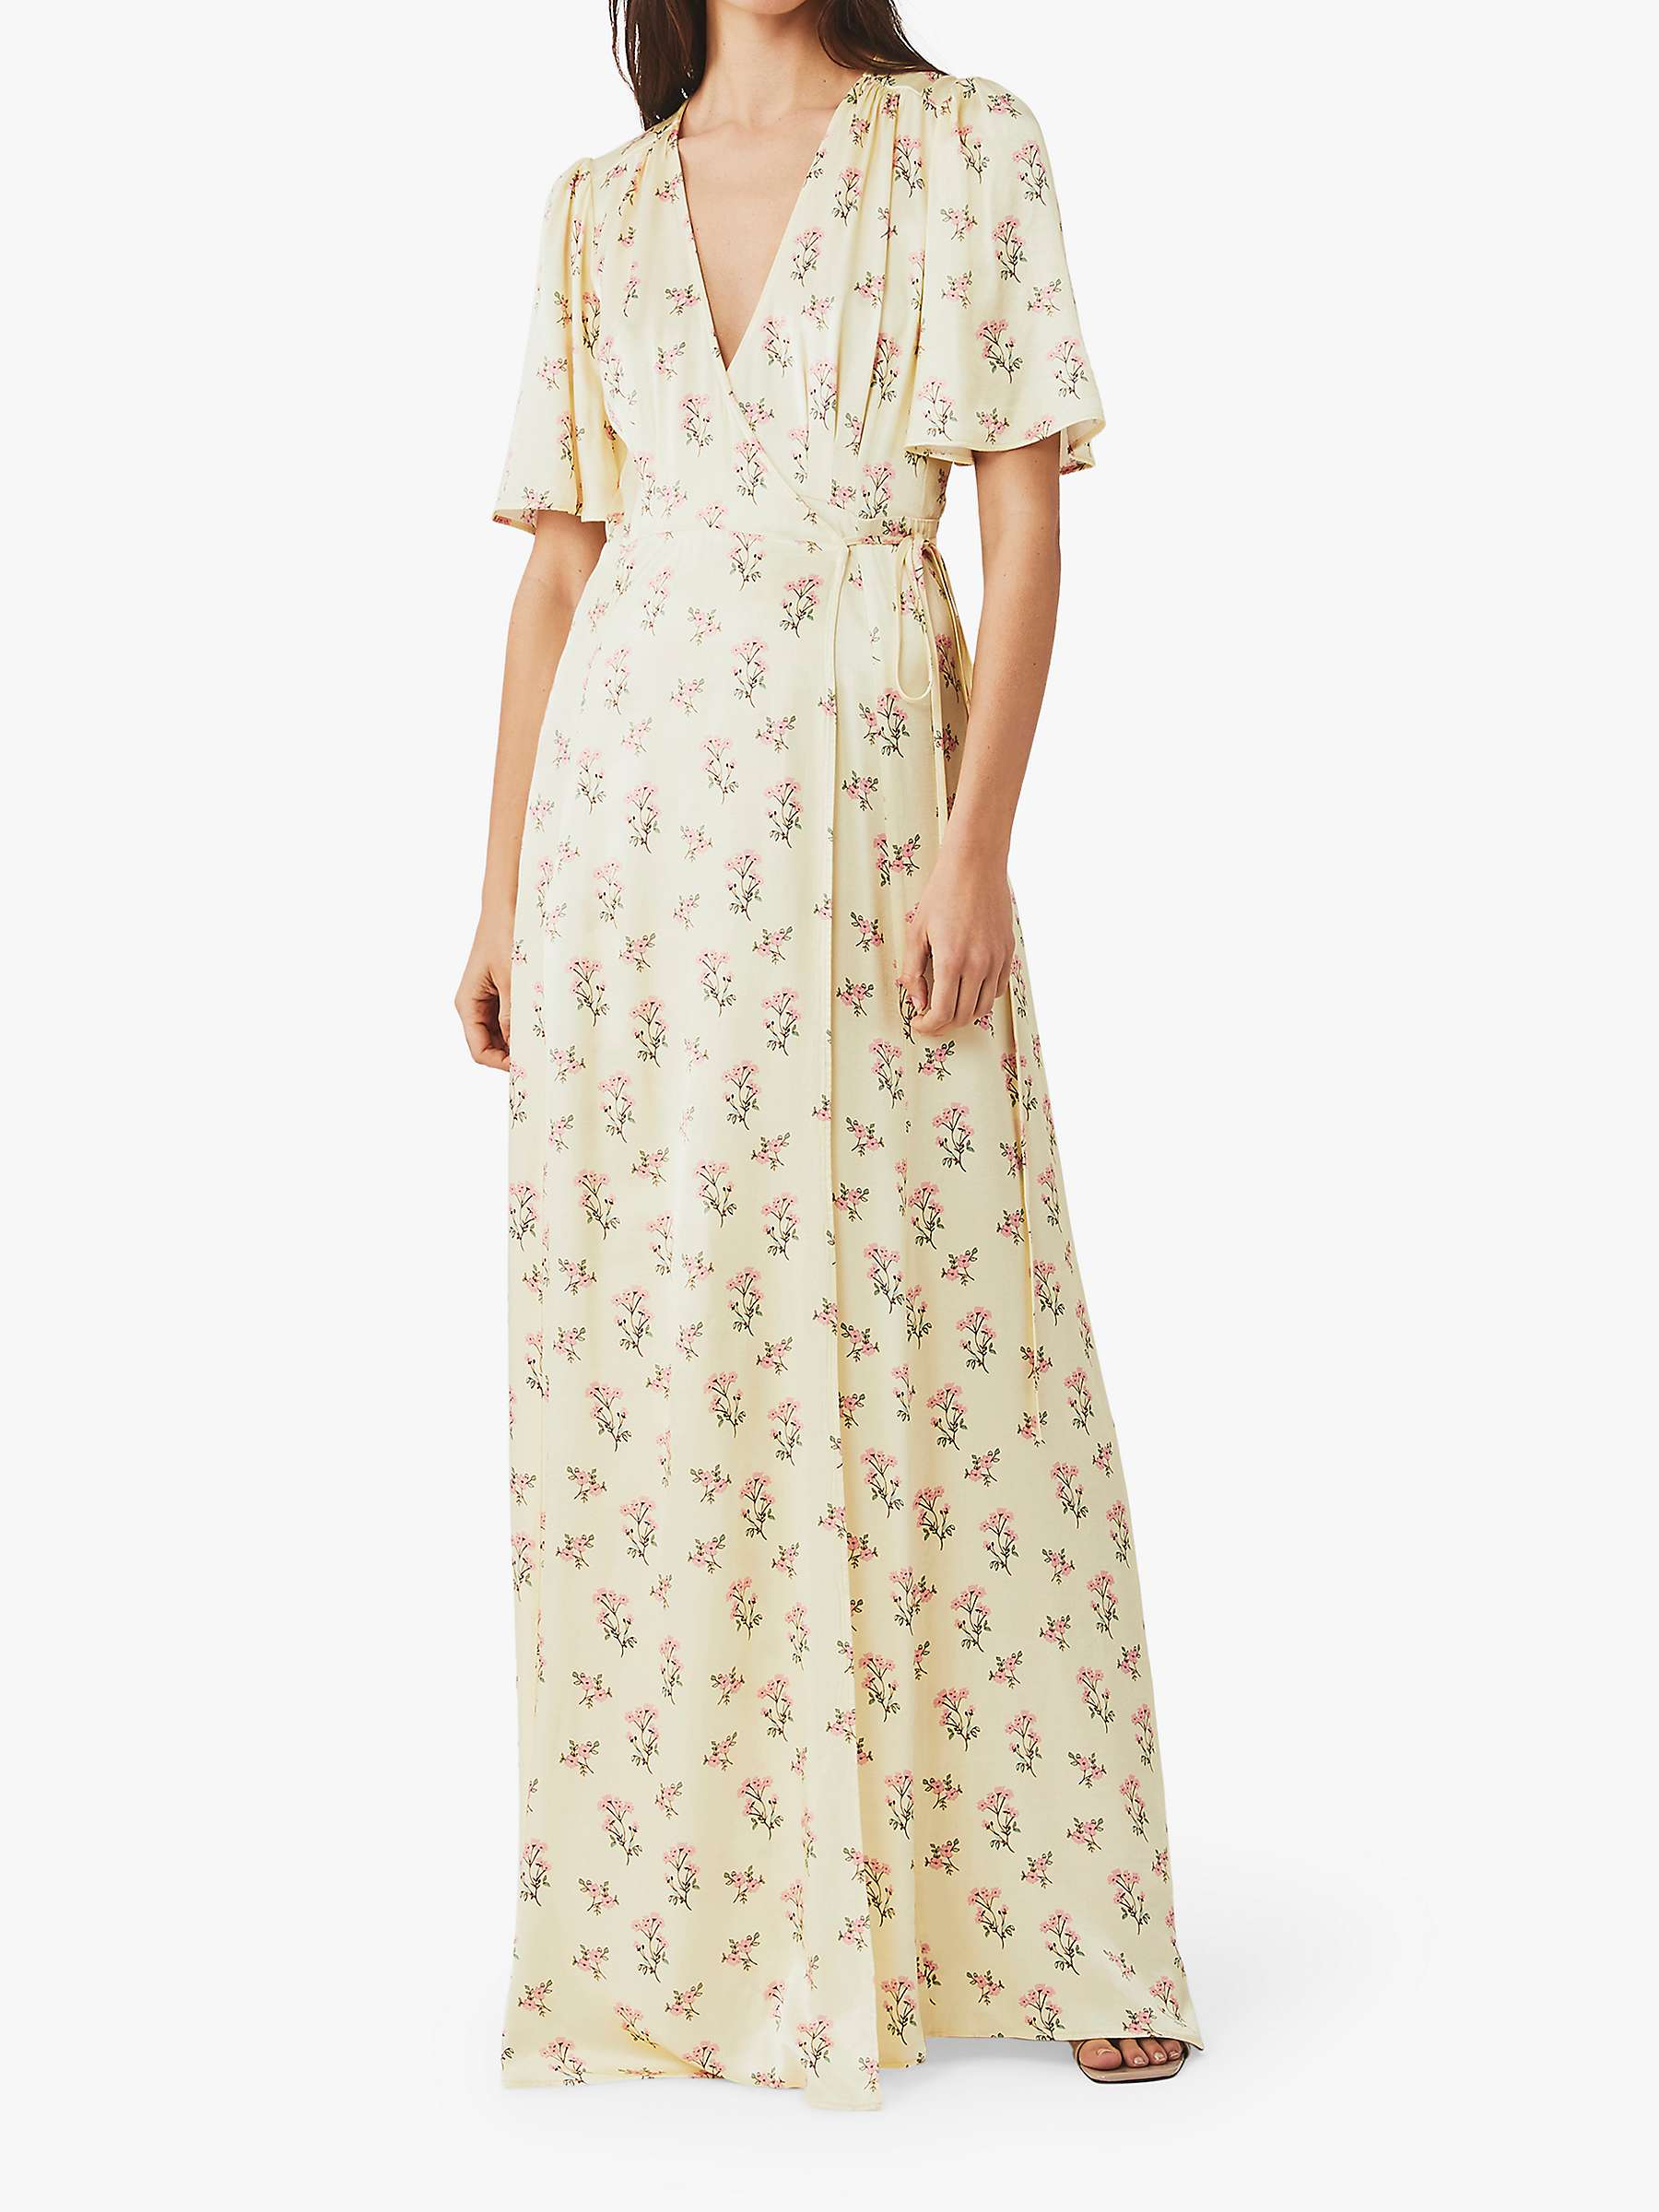 Ghost Perla Wrap Dress, Whimsy Bunches at John Lewis \u0026 Partners